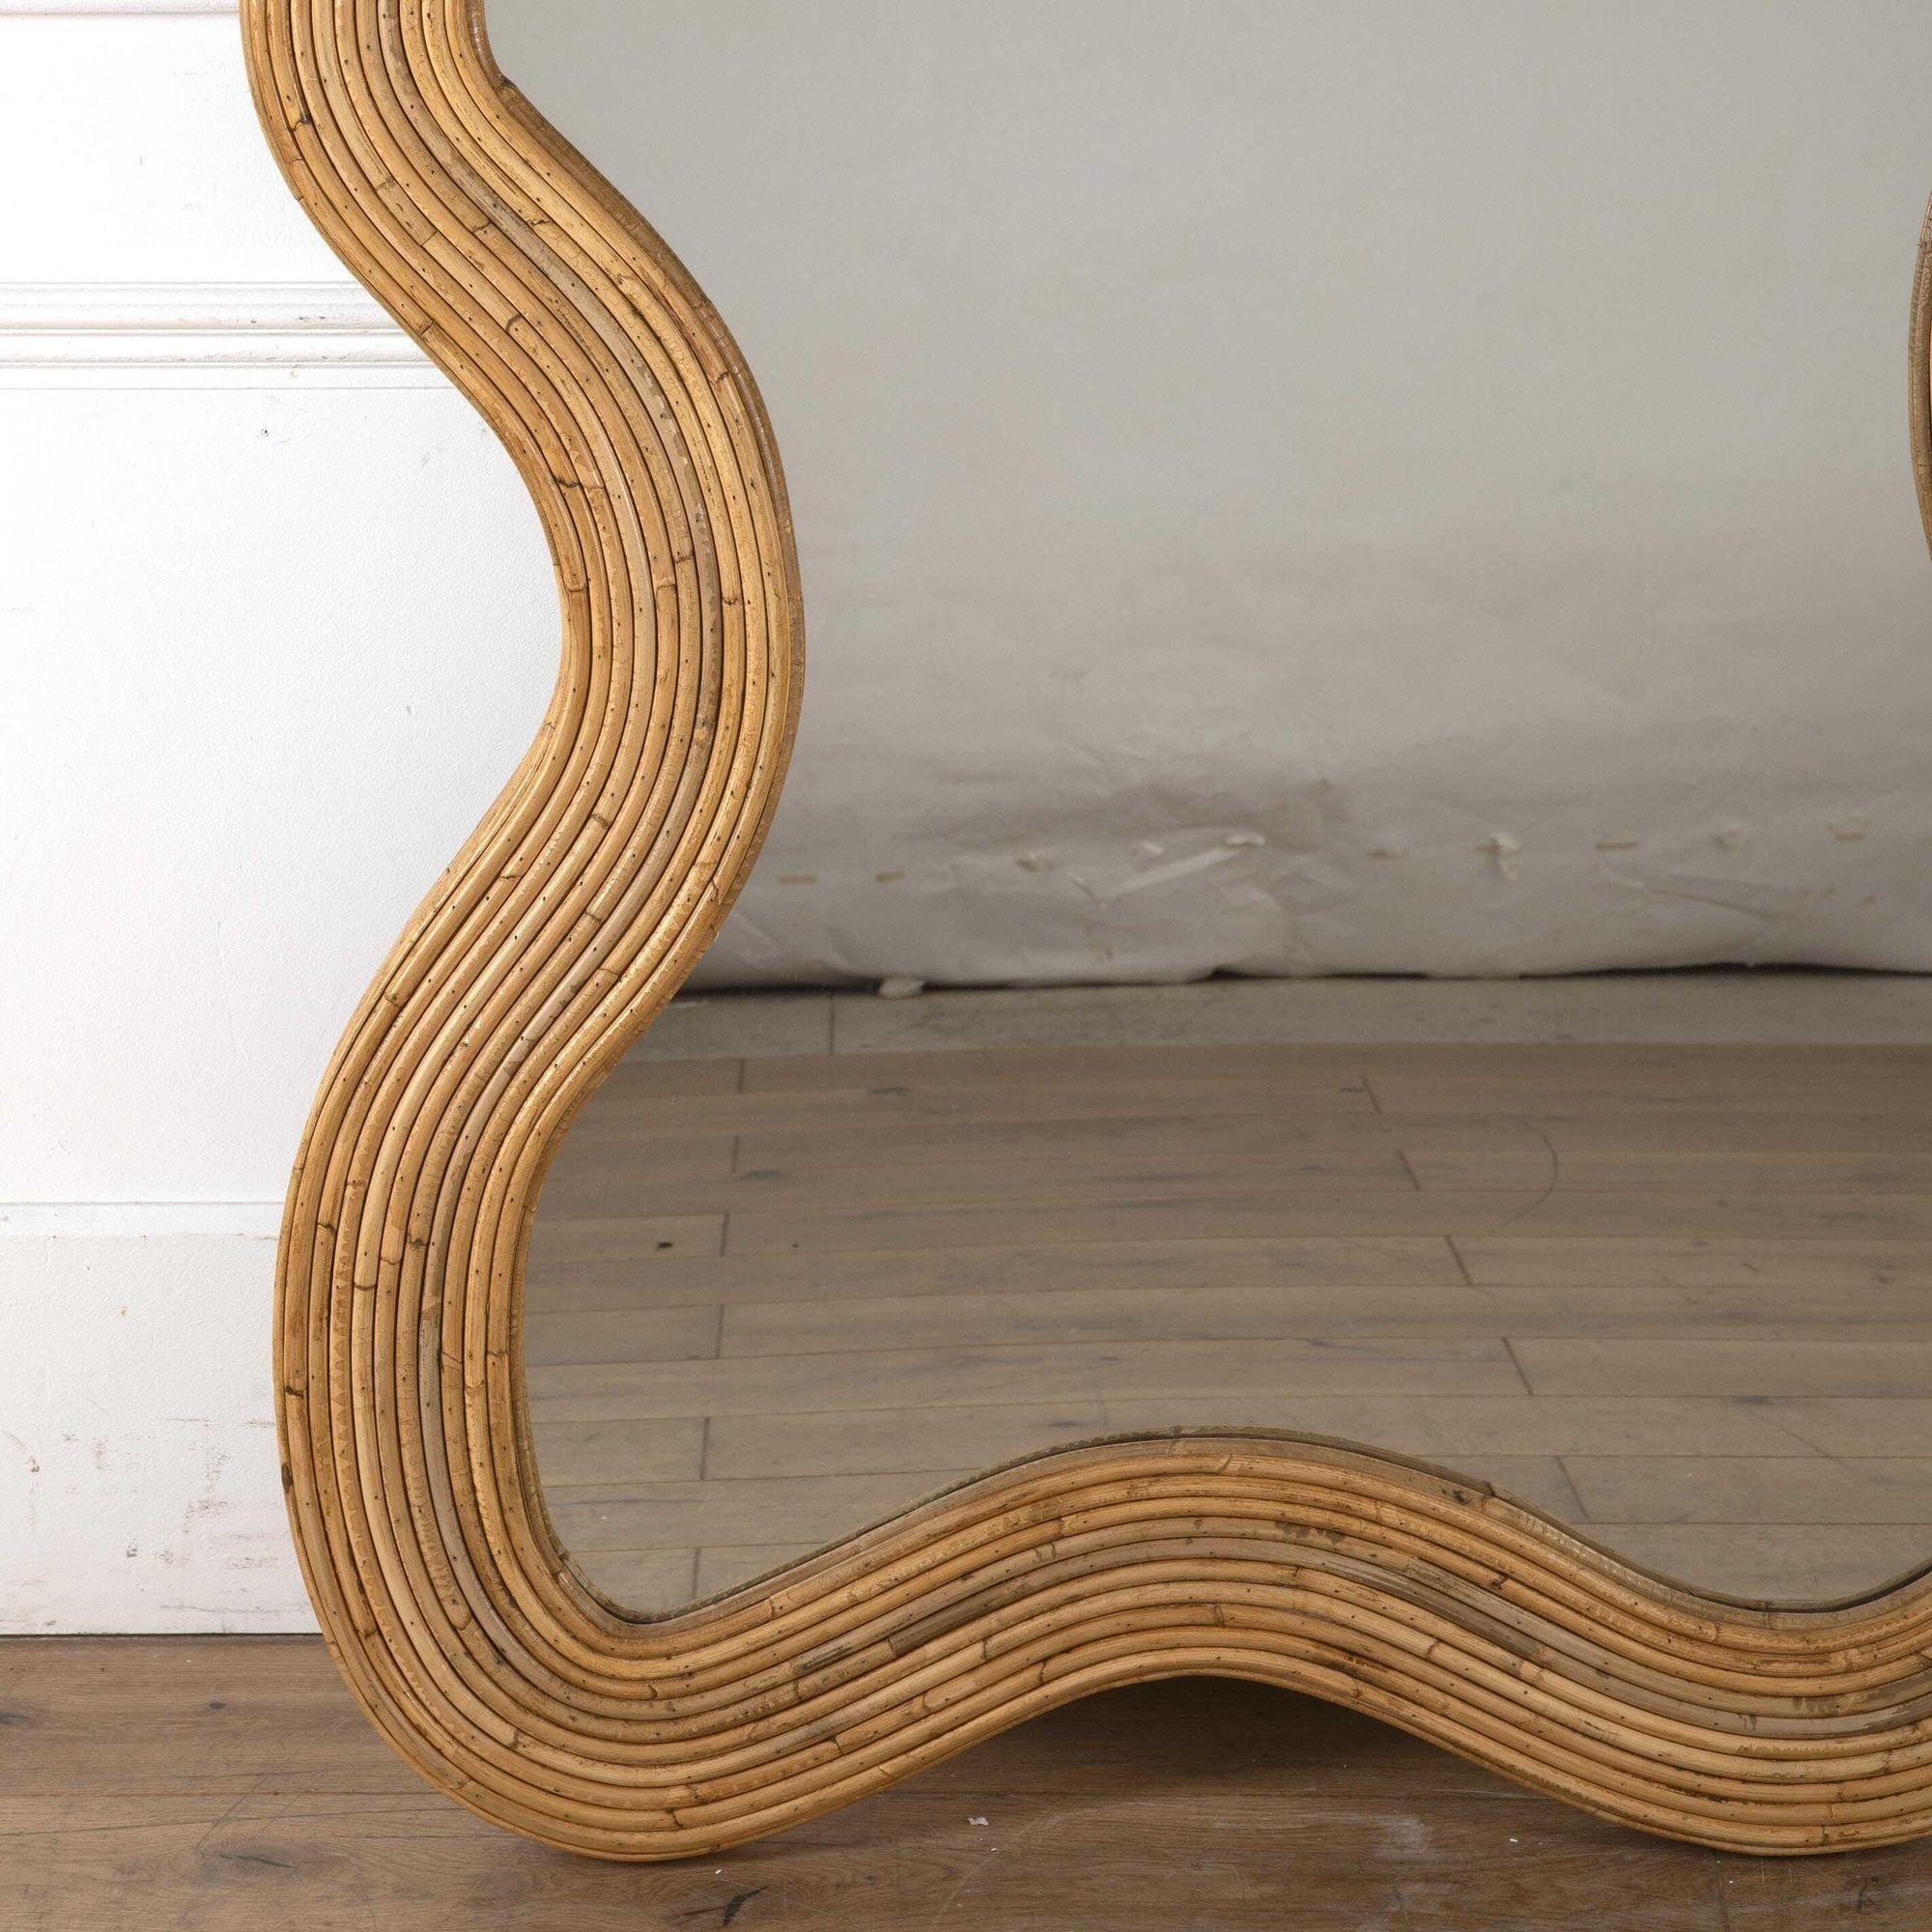 Large mid-century Italian Vivai Del Sud style bamboo mirror.
With it's fantastic wavy bamboo frame this mirror would be a stylish addition to any interior, especially within a dressing room.